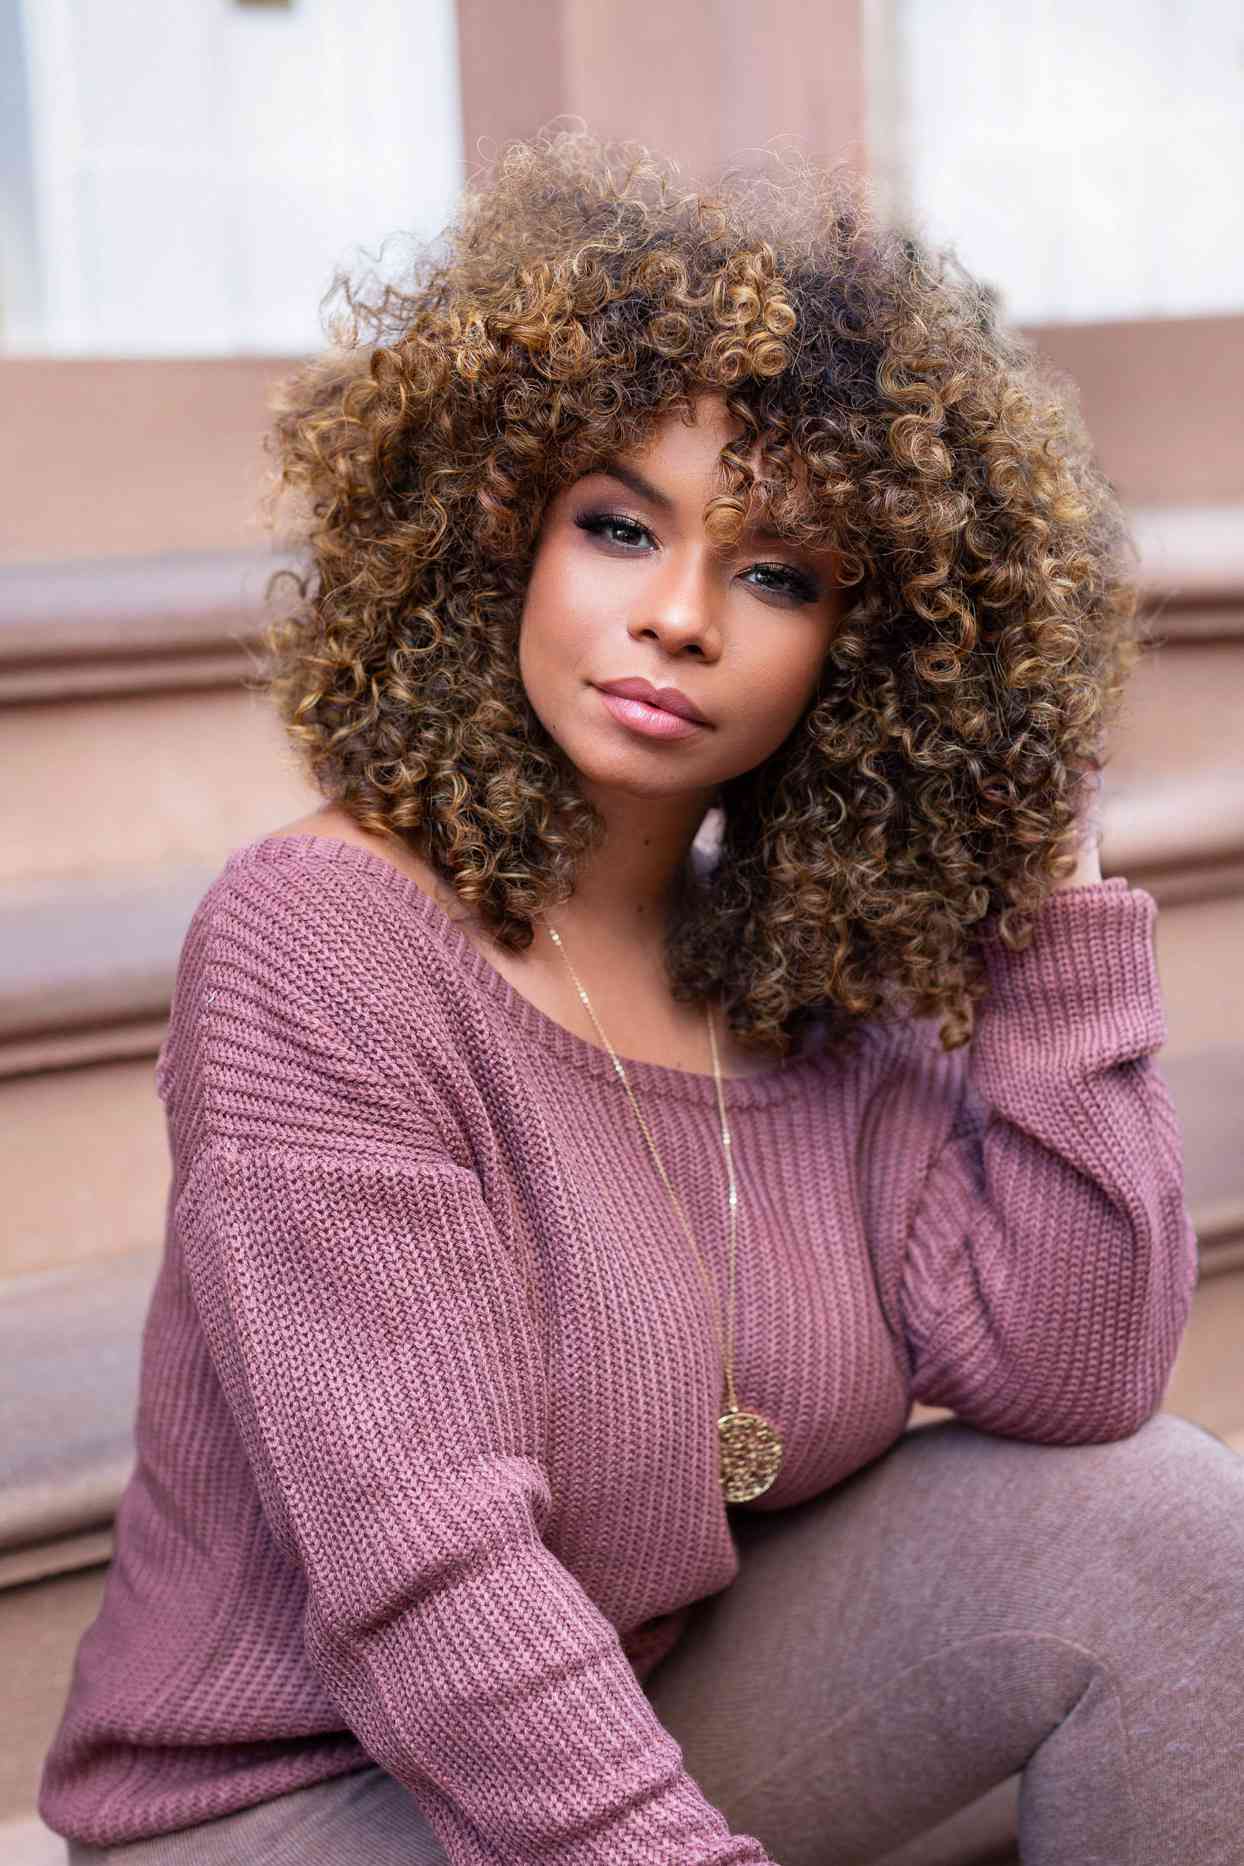 woman in purple sweater with curly hair